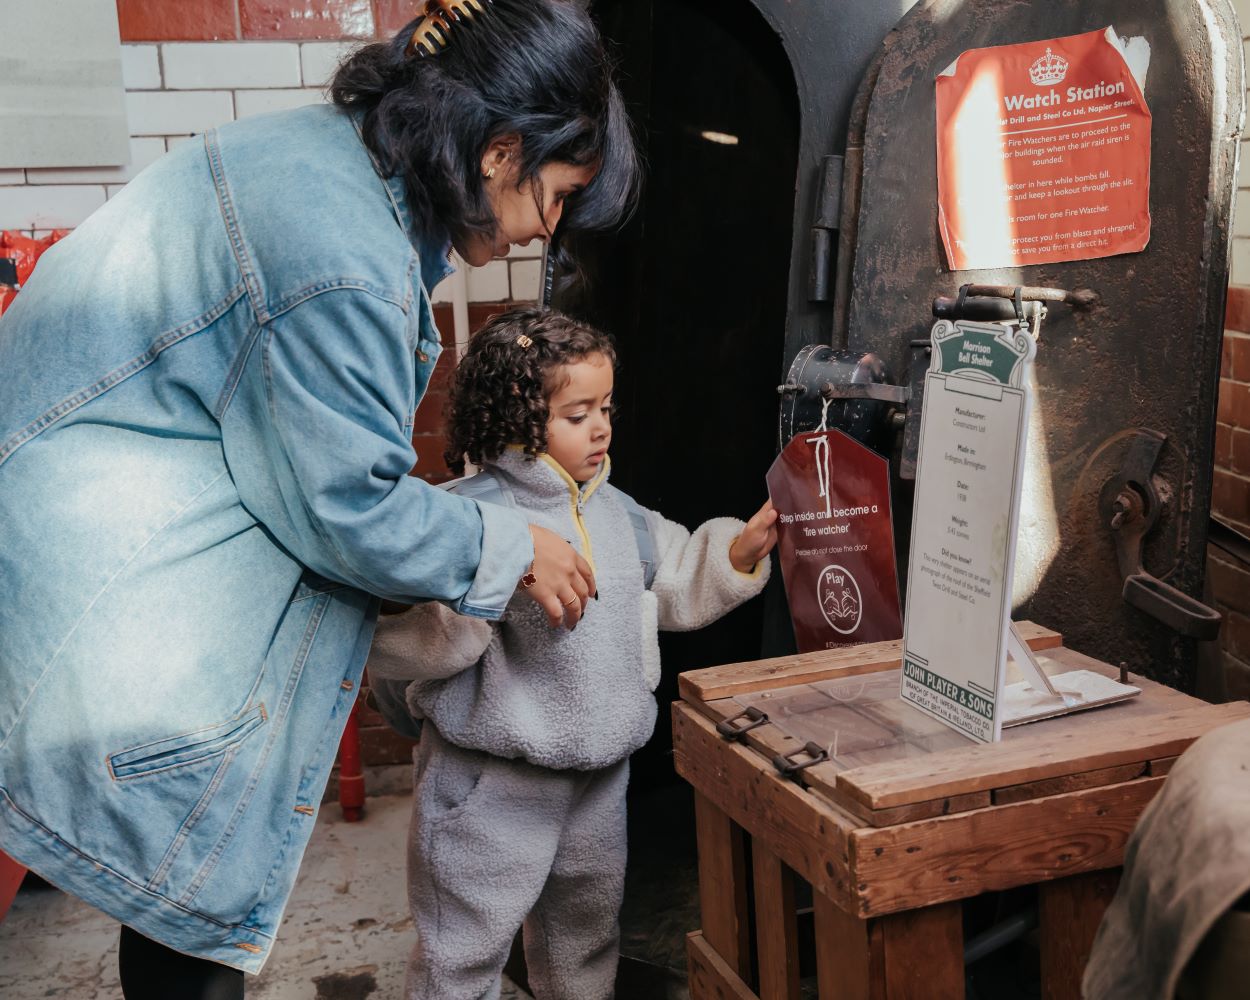 A young girl and a woman look at a Fire Watch station exhibit at the National Emergency Services Museum. The girl is touching a label hanging from an object.